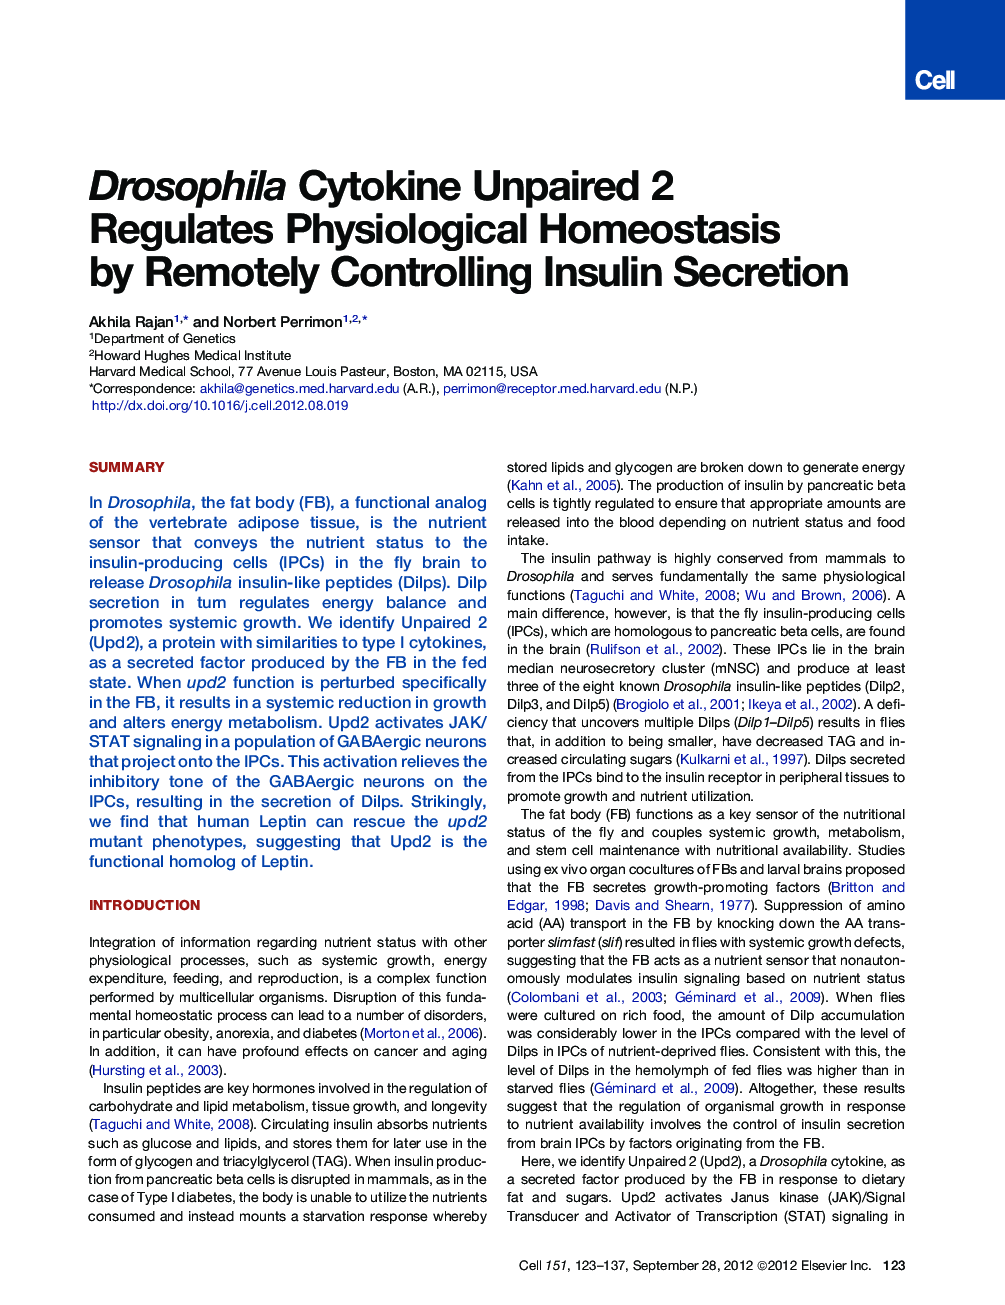 Drosophila Cytokine Unpaired 2 Regulates Physiological Homeostasis by Remotely Controlling Insulin Secretion